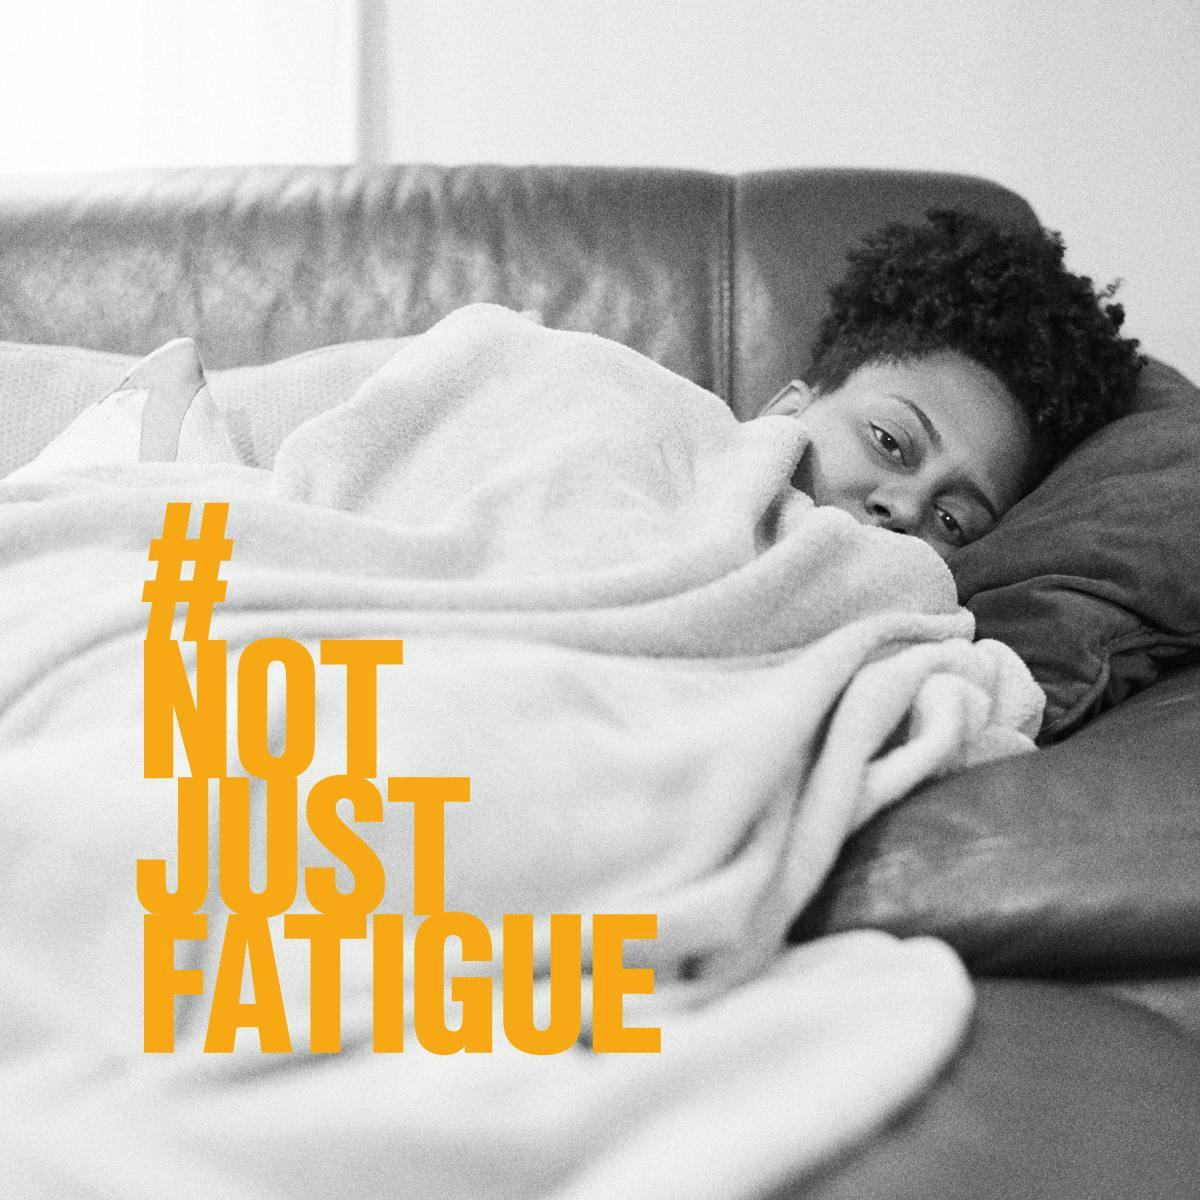 Photo of woman lying on her couch with #notjustfatigue.